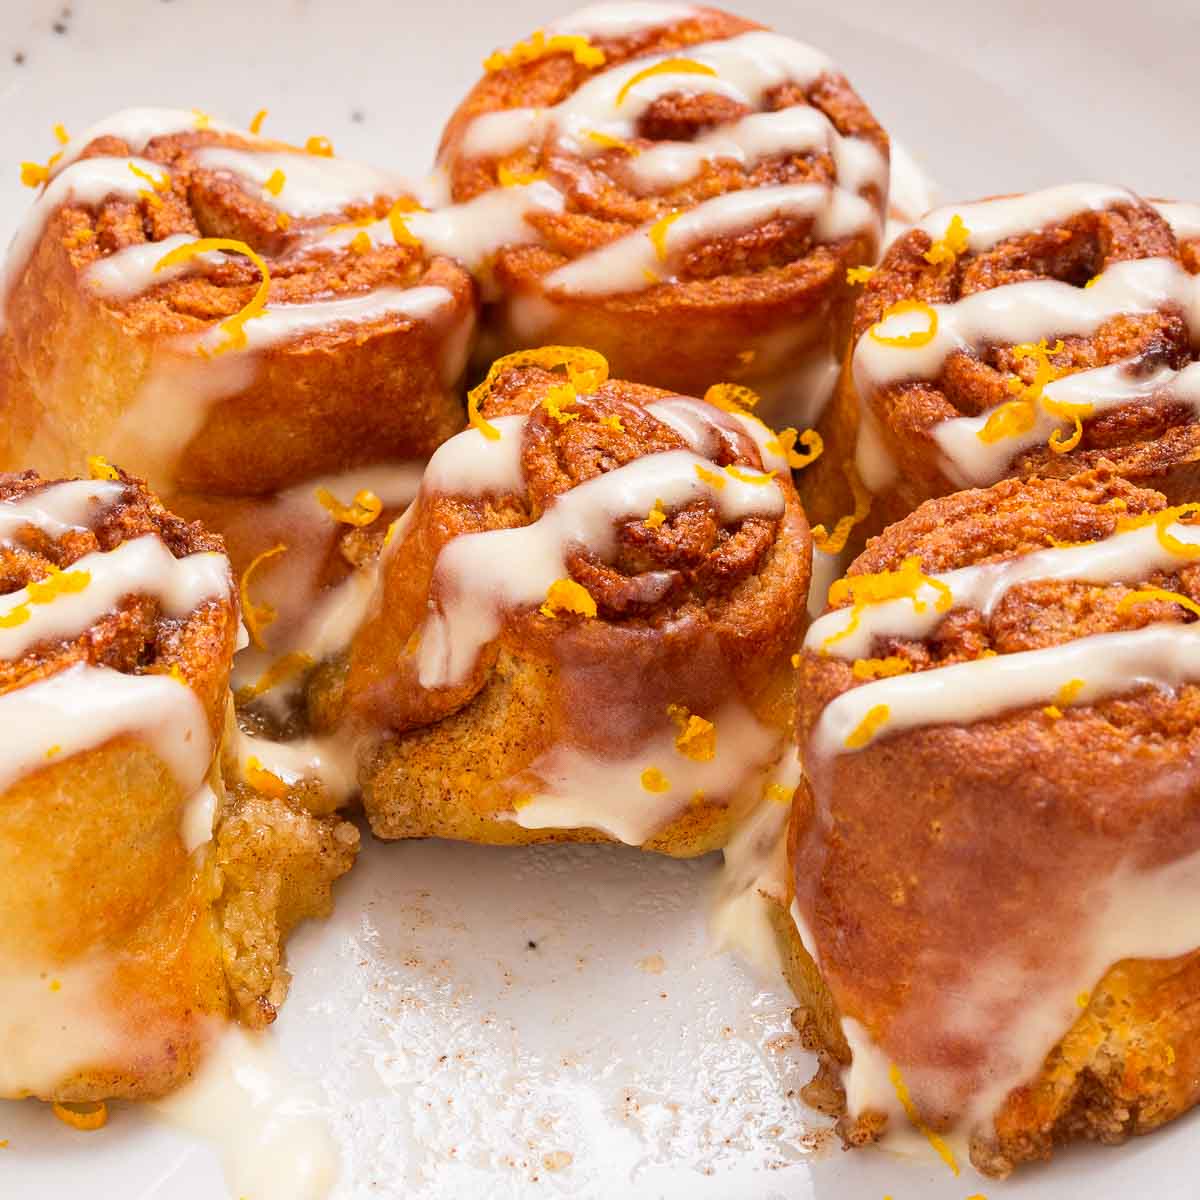 Low carb air fryer cinnamon rolls with a cream cheese glaze on a white plate